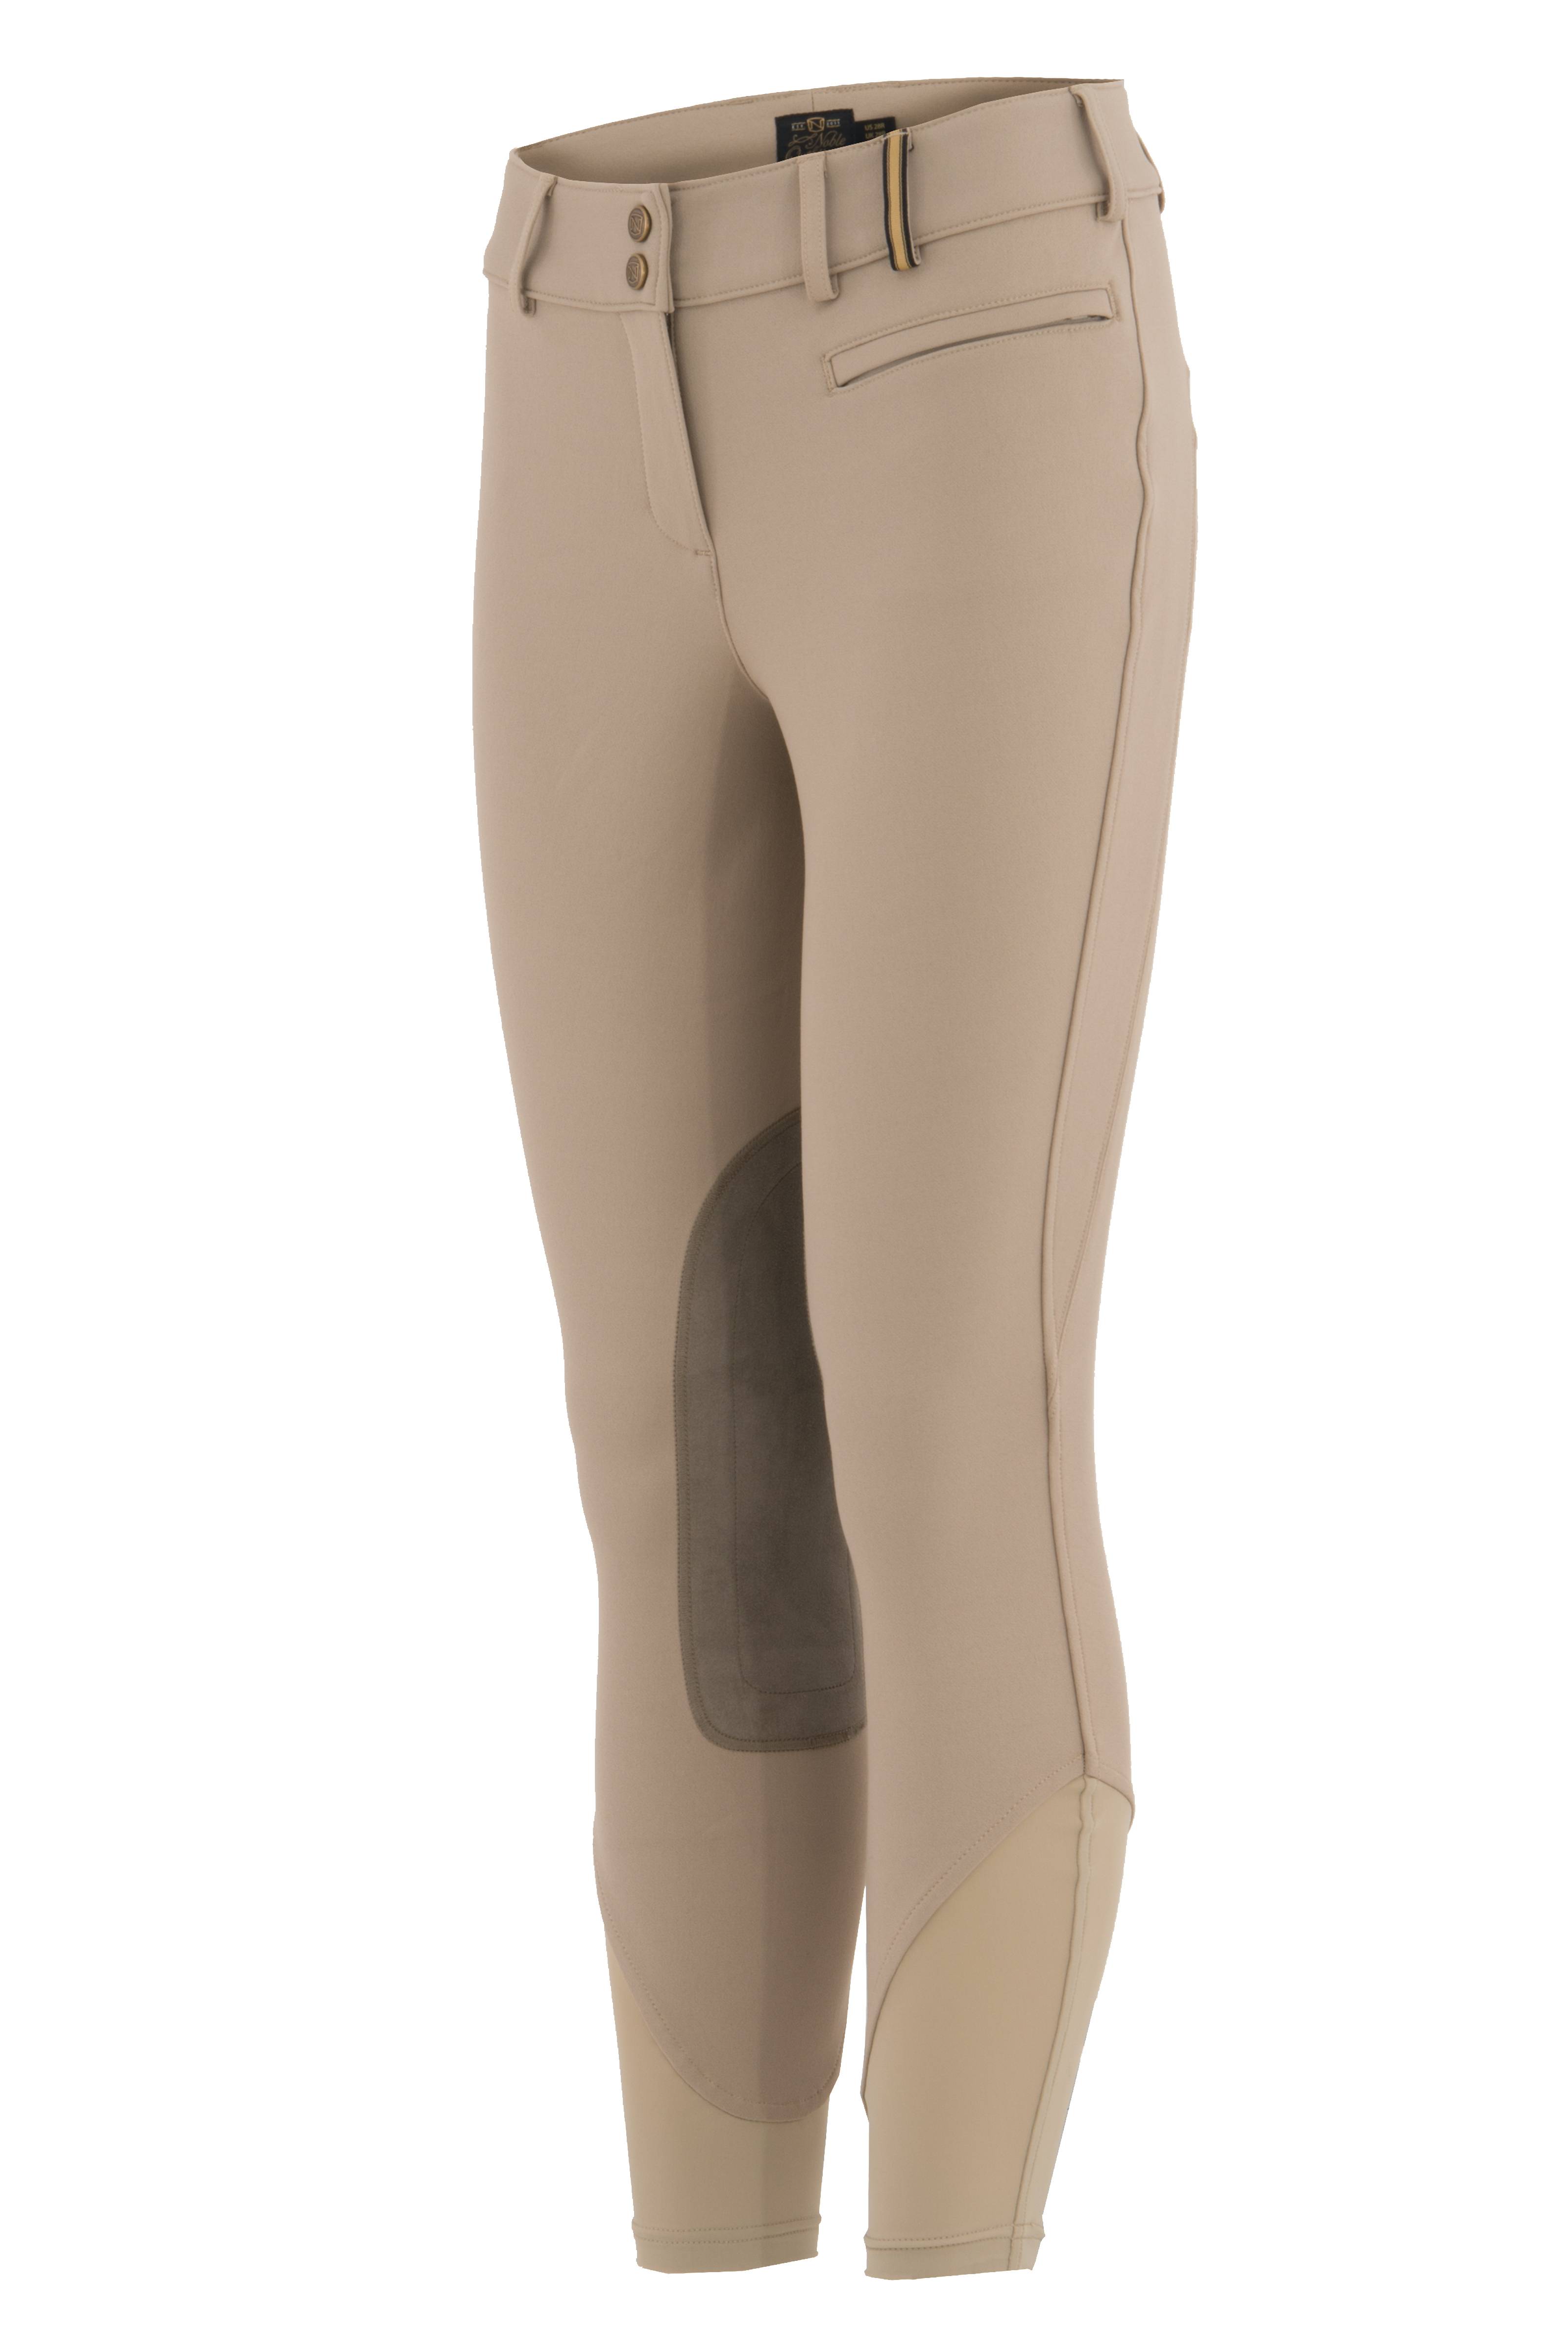 Noble Outfitters Signature Breeches - Ladies, Knee Patch